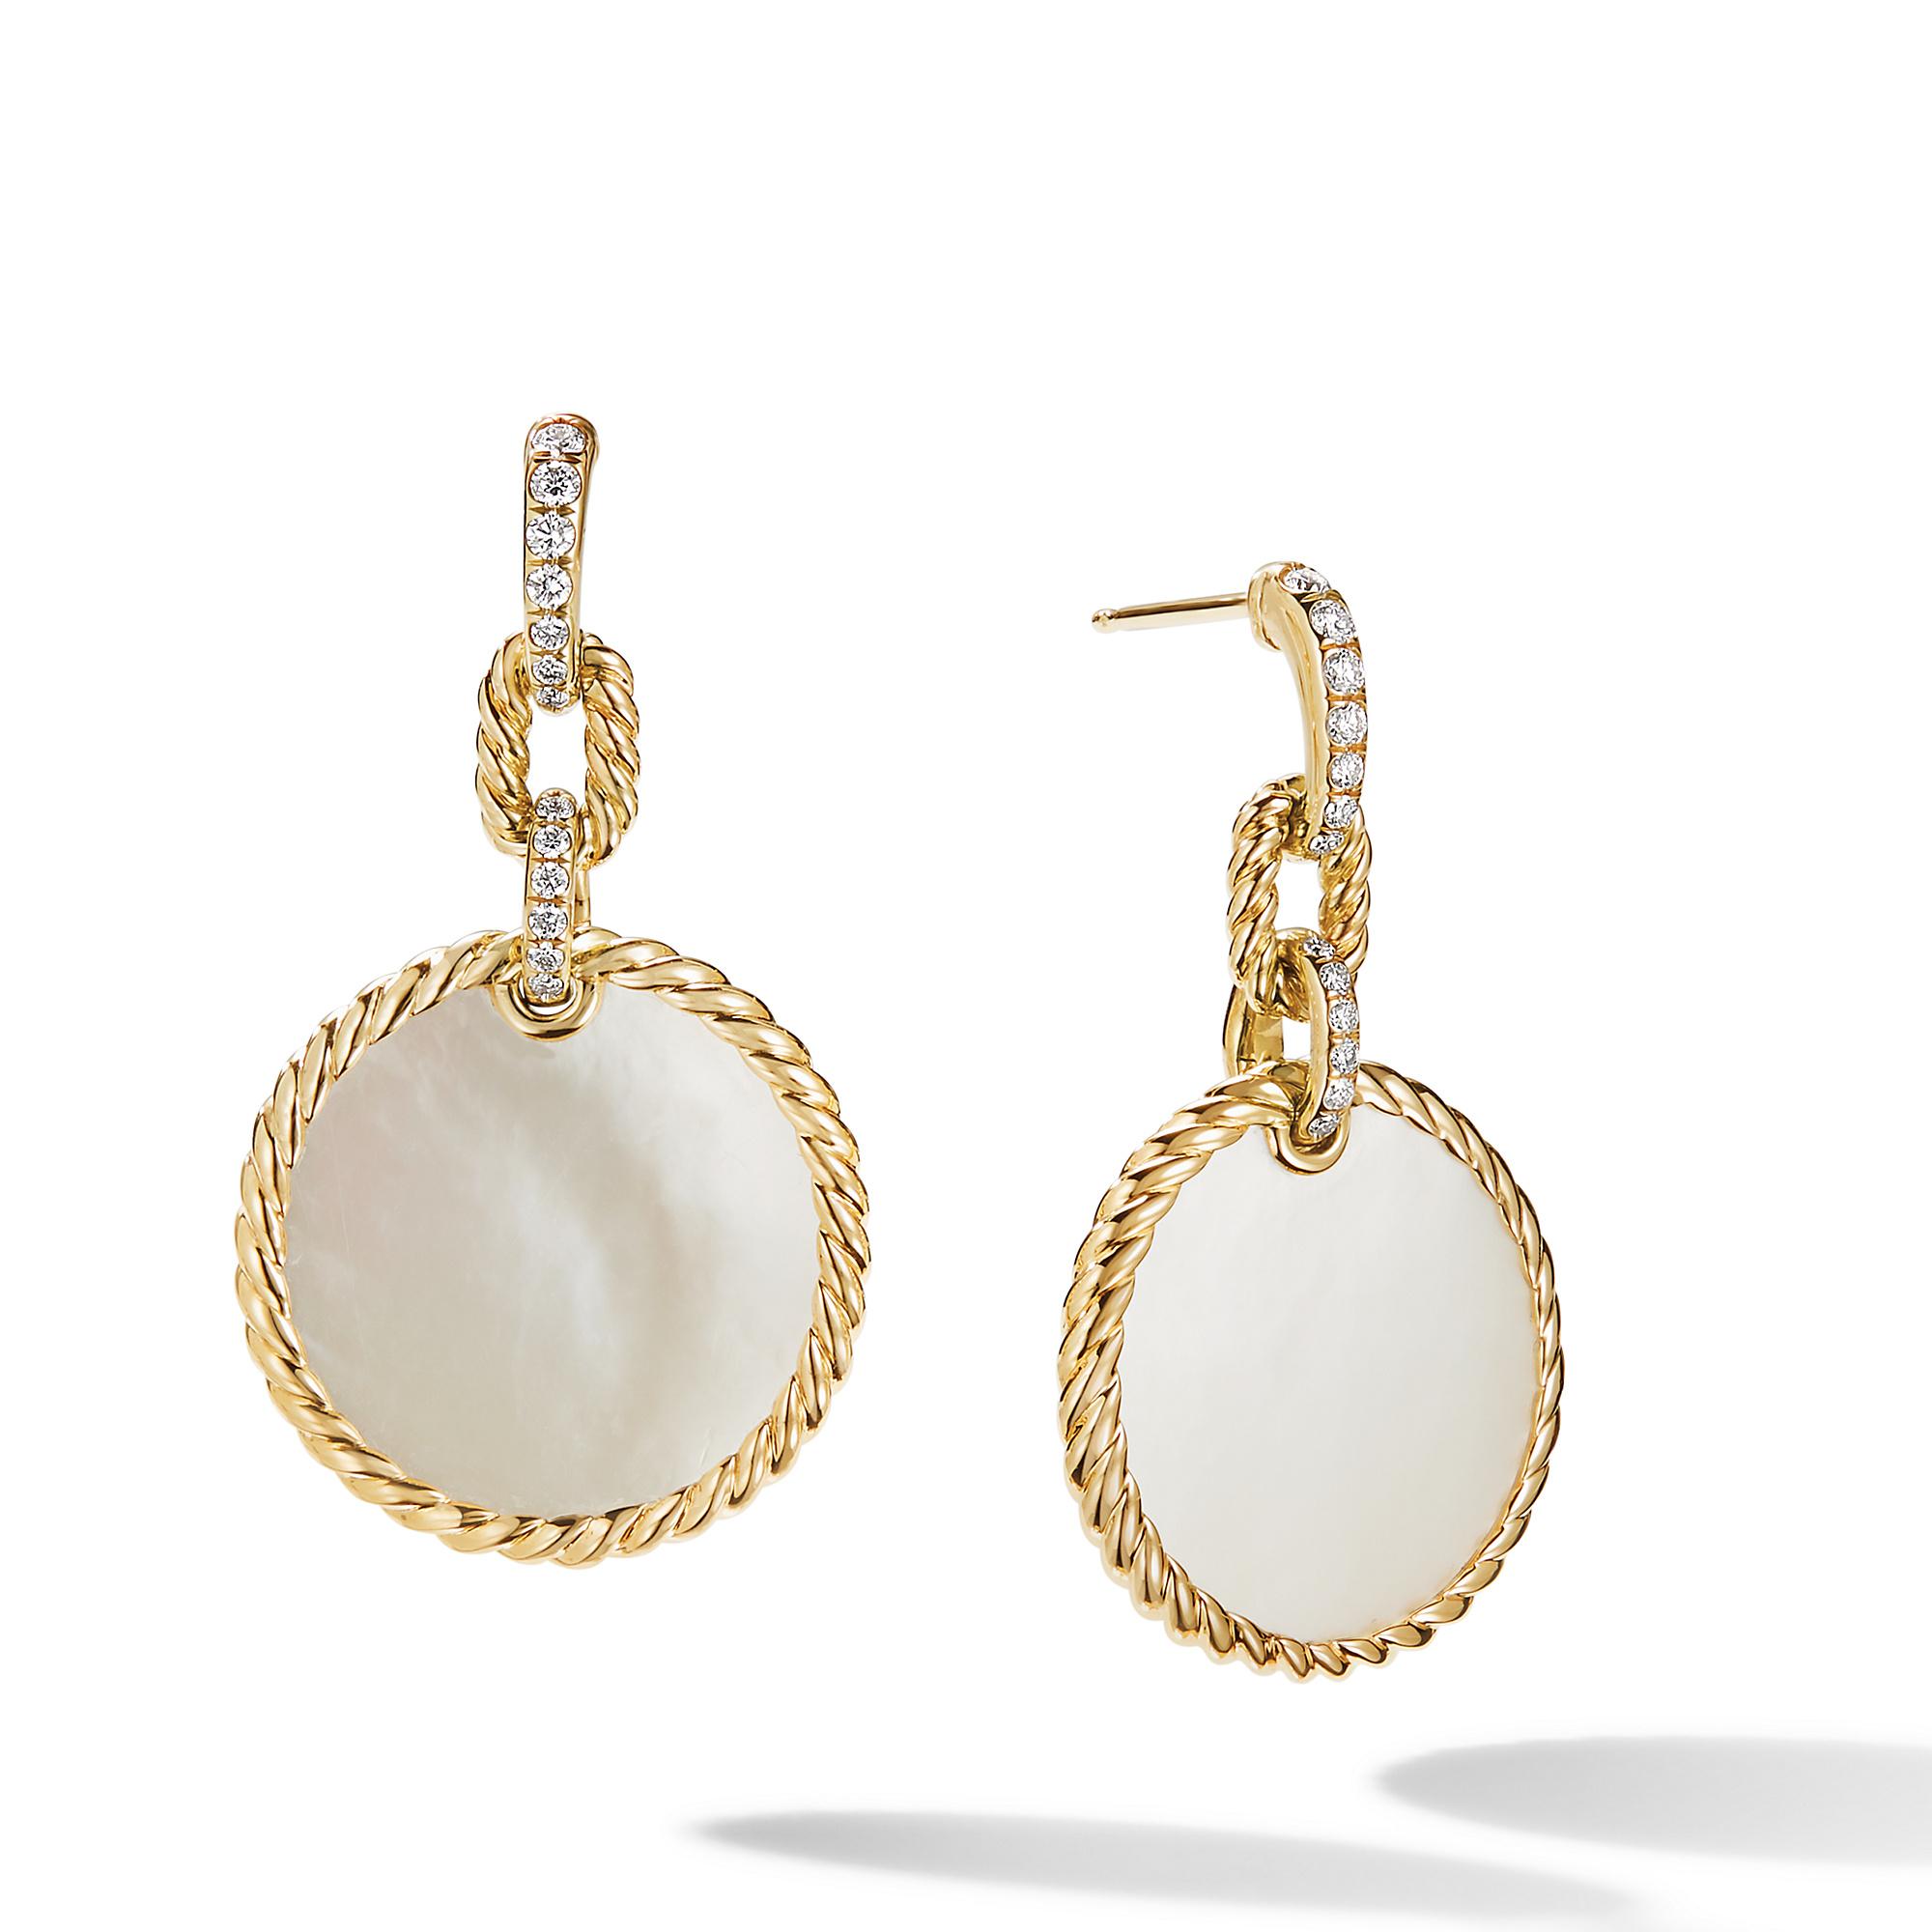 David Yurman DY Elements Drop Earrings 18K Yellow Gold with Mother Of Pearl and Pave Diamonds